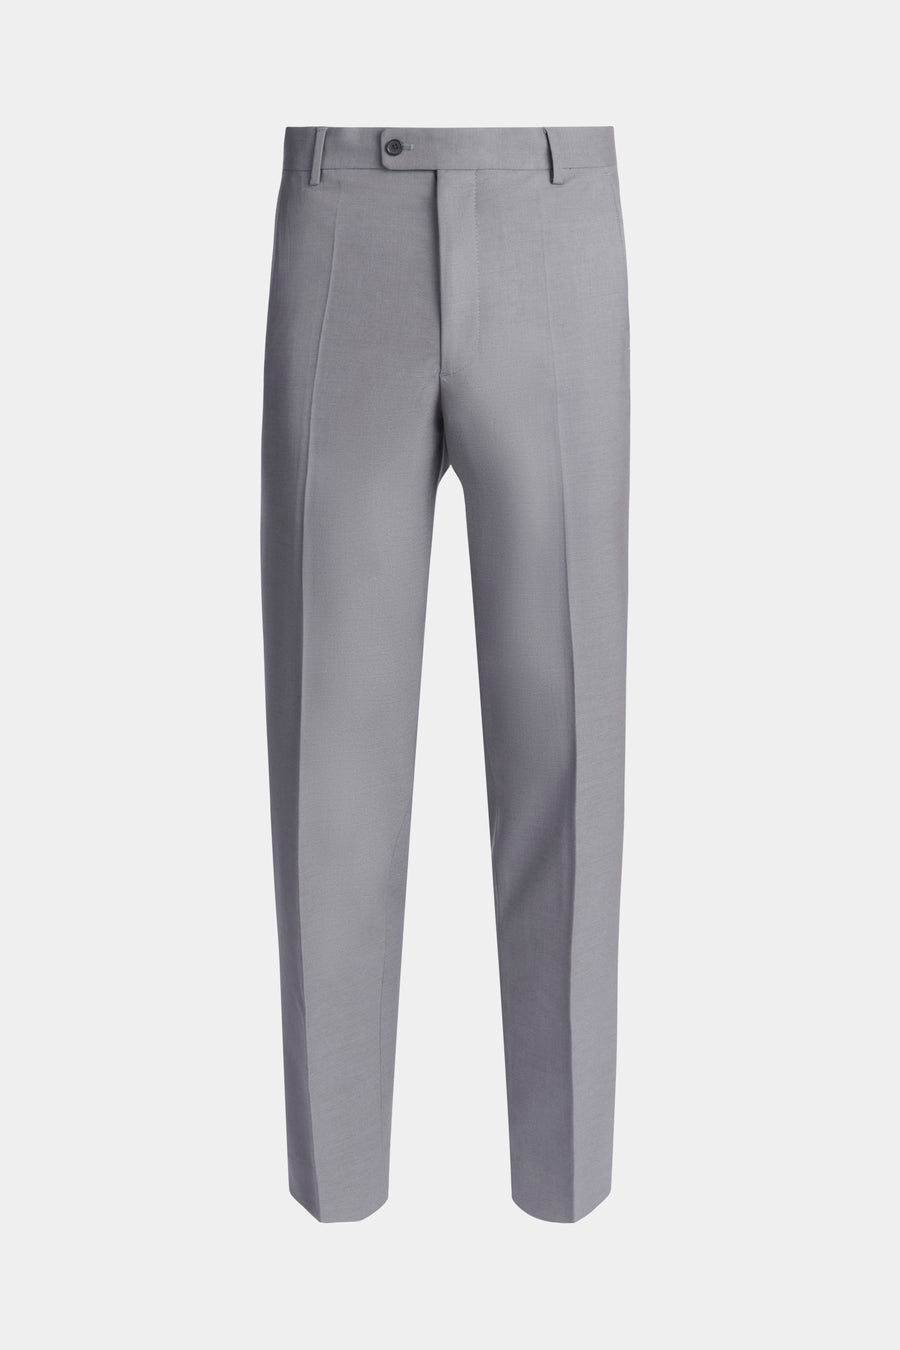 Classic Plain Front Trouser in Charcoal Grey